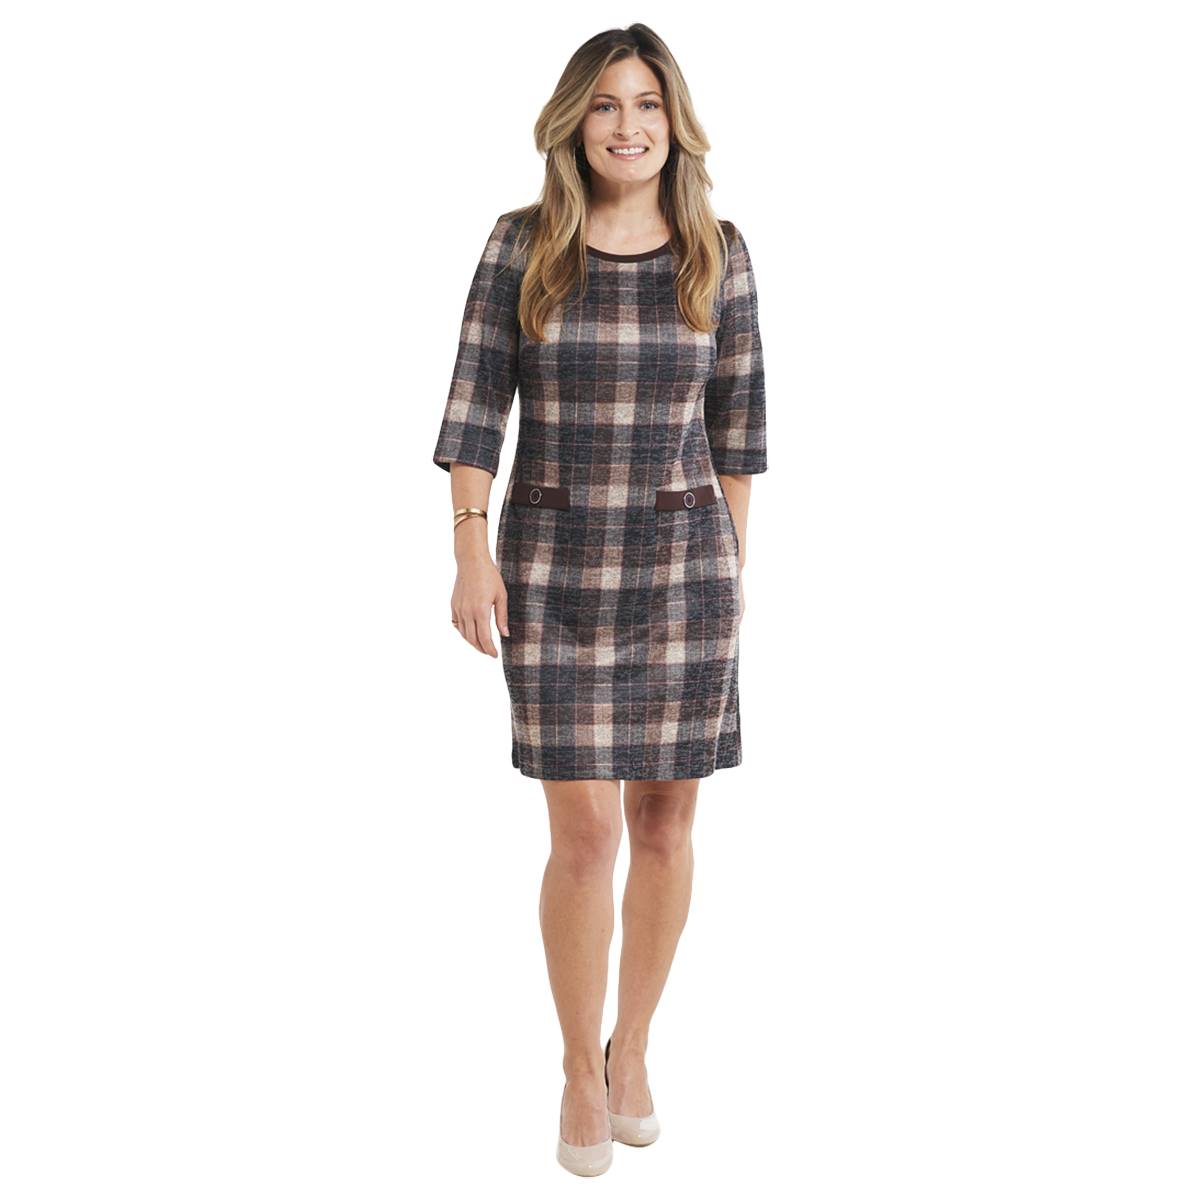 Petite Connected Apparel Elbow Sleeve Plaid A-Line Dress